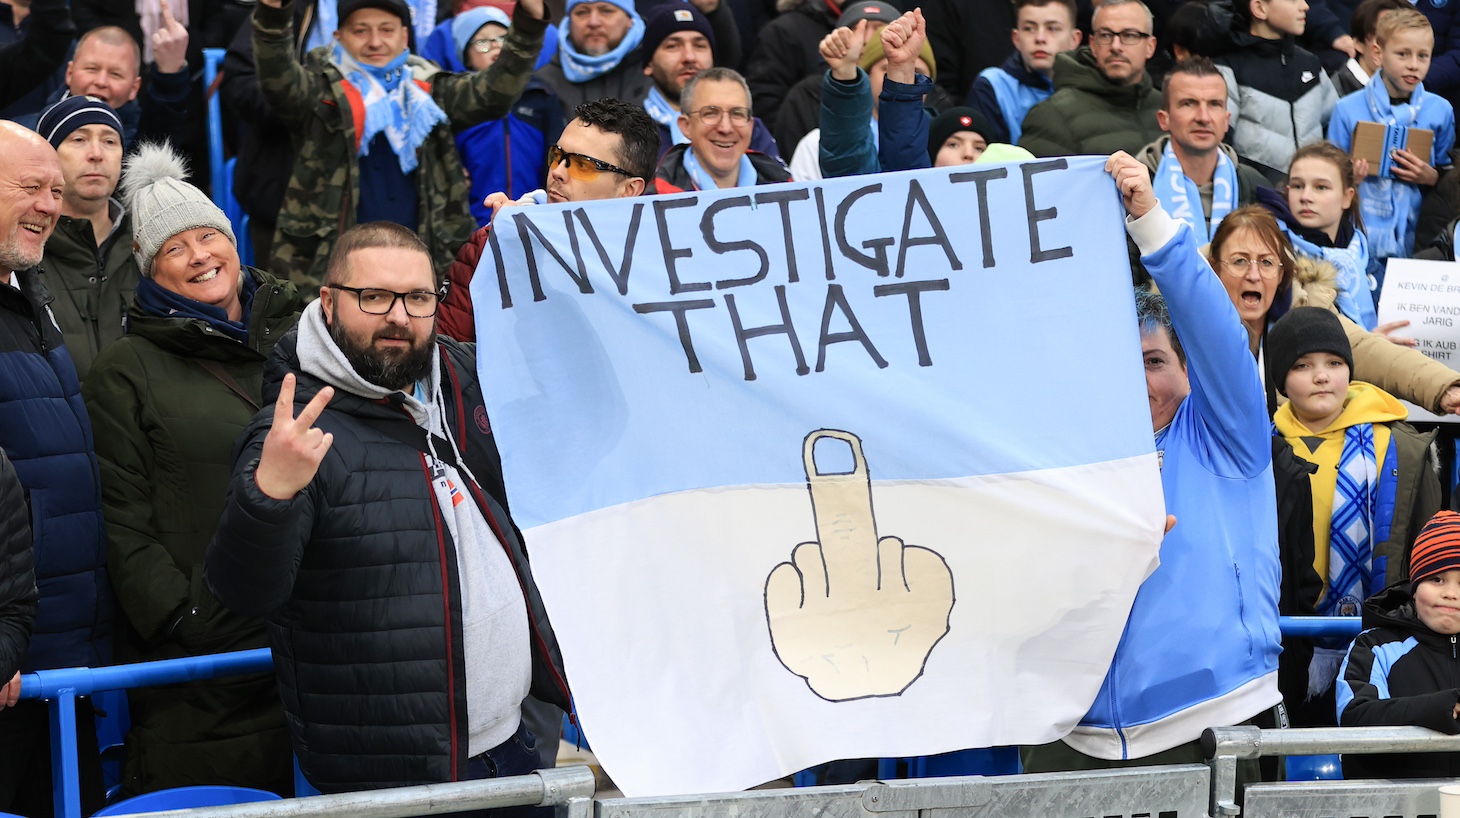 Manchester City fans hold up a sign in protest of the charges brought against the club due to financial fair play during the Premier League match between Manchester City and Aston Villa at Etihad Stadium on February 12, 2023 in Manchester, United Kingdom.